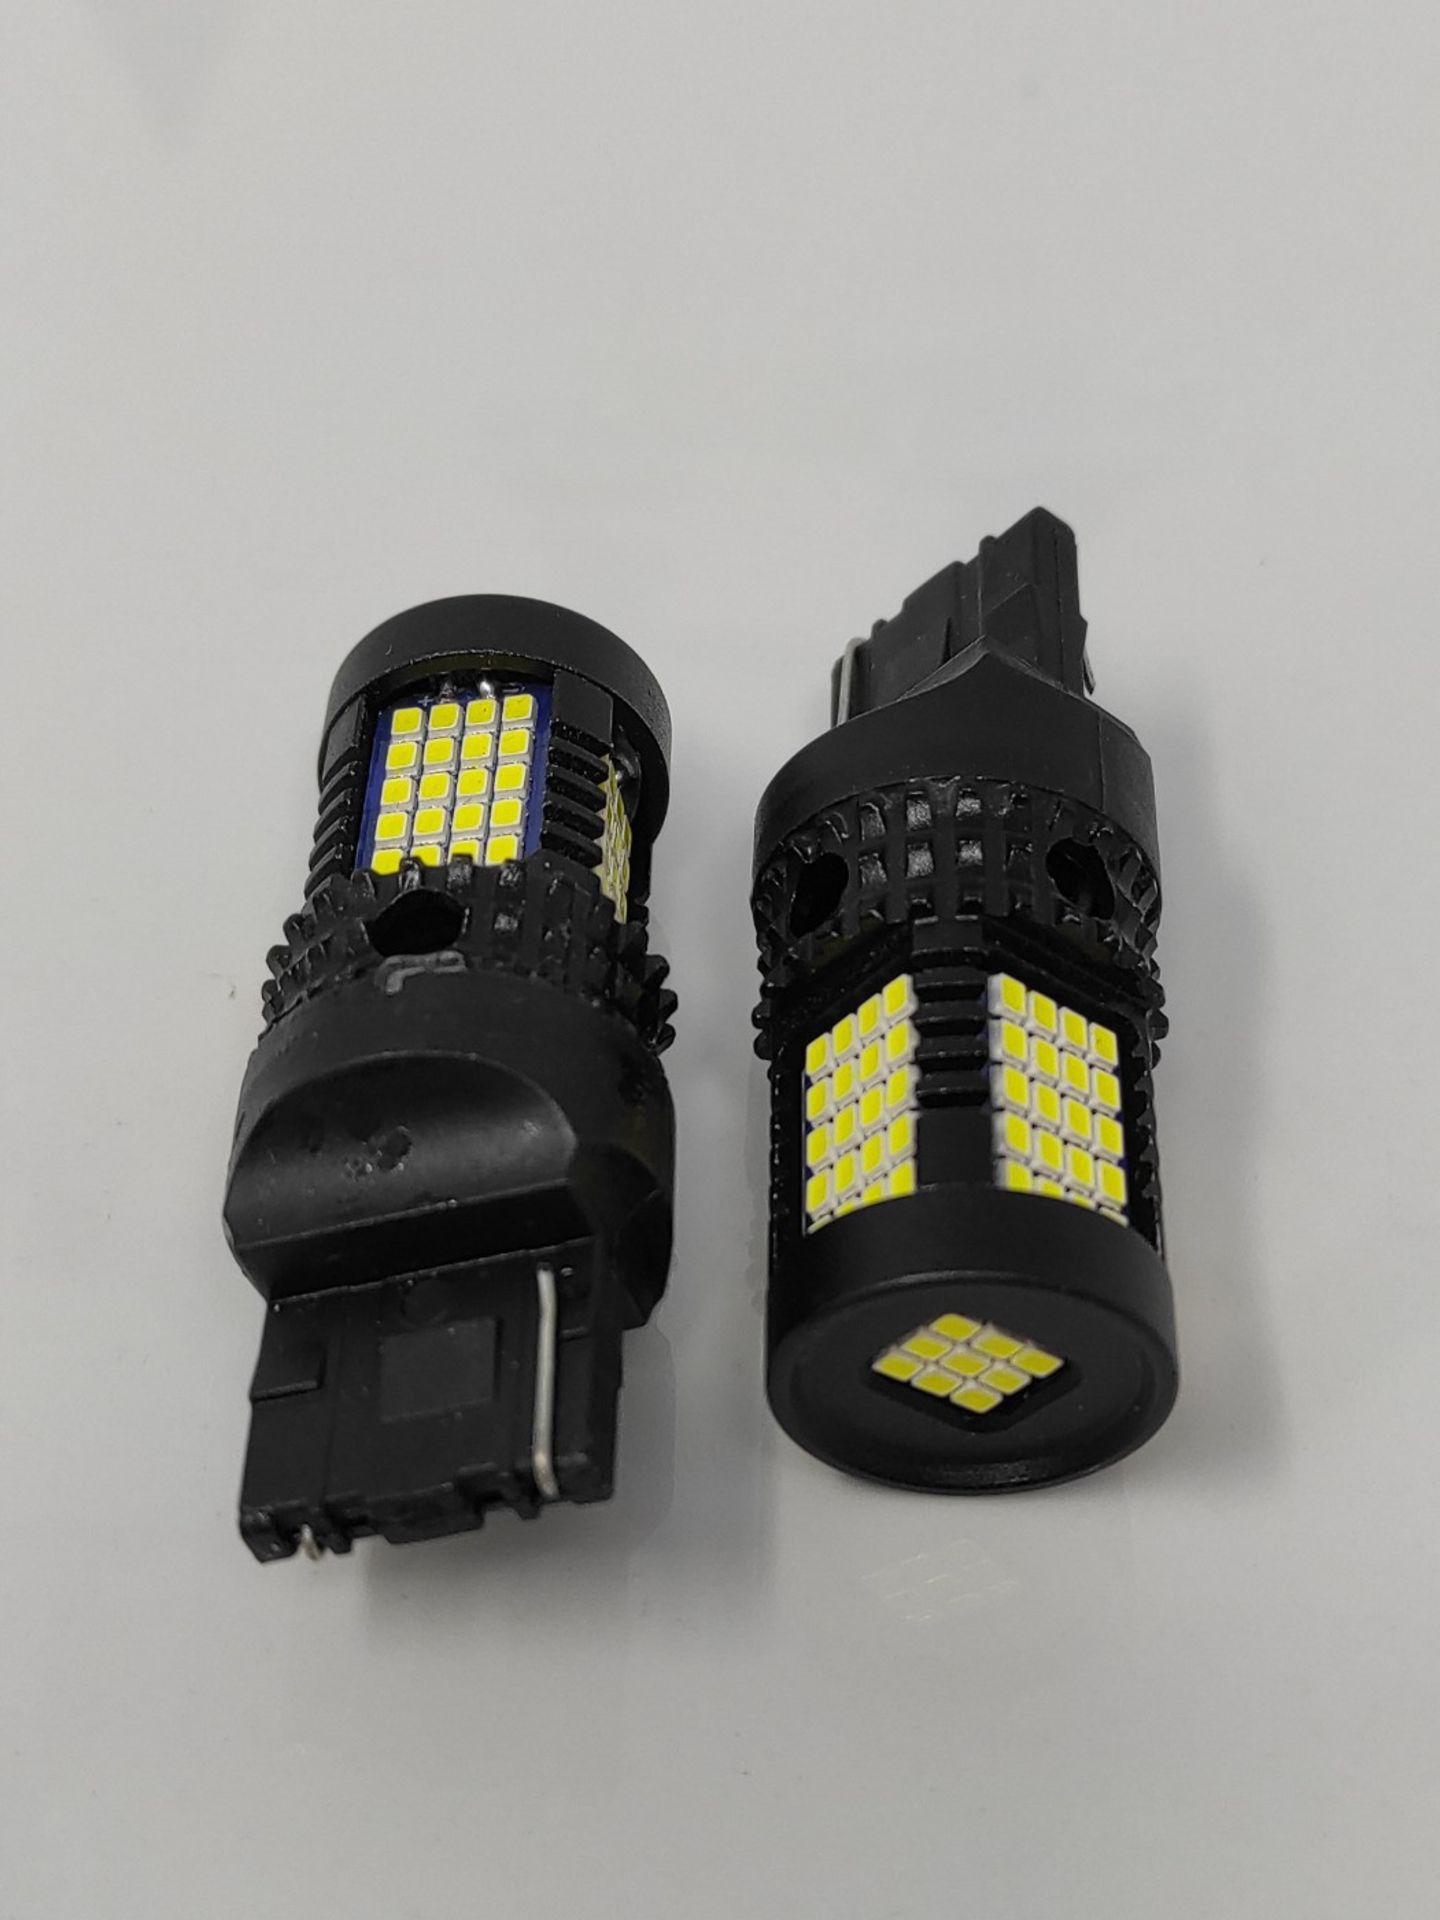 W21W 7440 LED Bulbs Extremely Bright White, NATGIC T20 7440LL 7440NA 7441 992 Replacem - Image 3 of 3